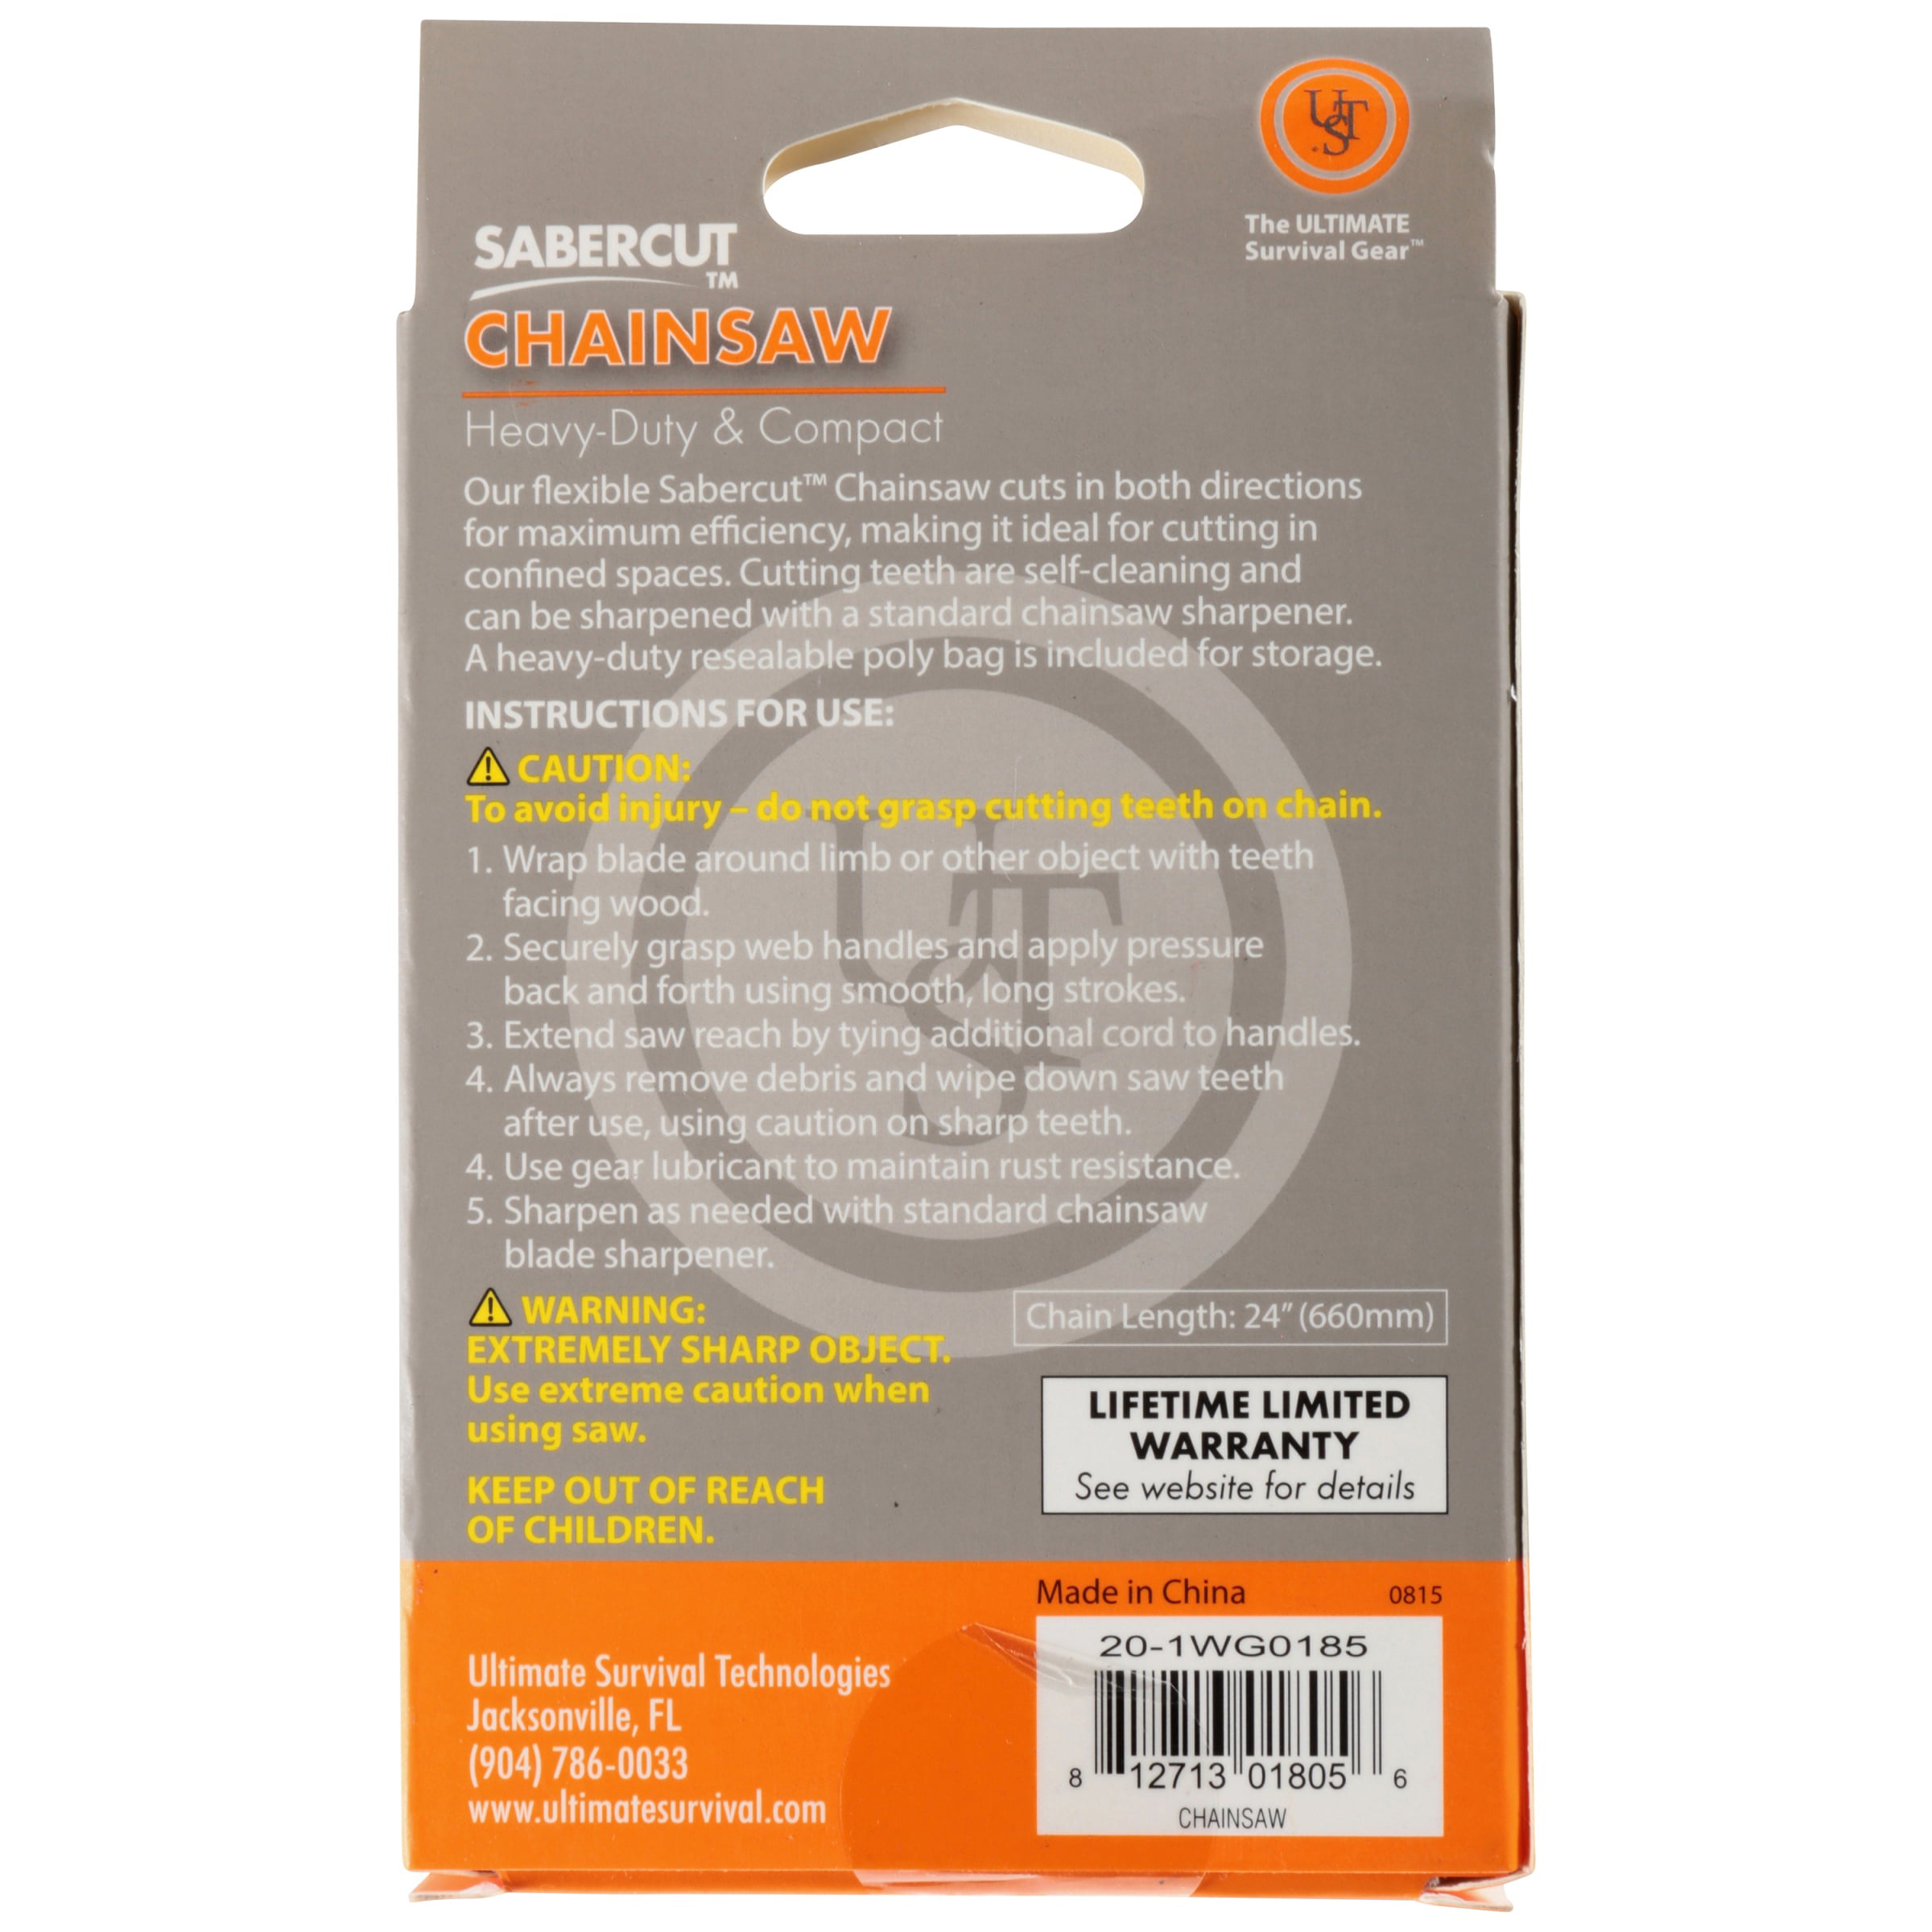 Ultimate Survival Technologies SaberCut Chainsaw Compact Heavy-Duty Saw 2-Pack